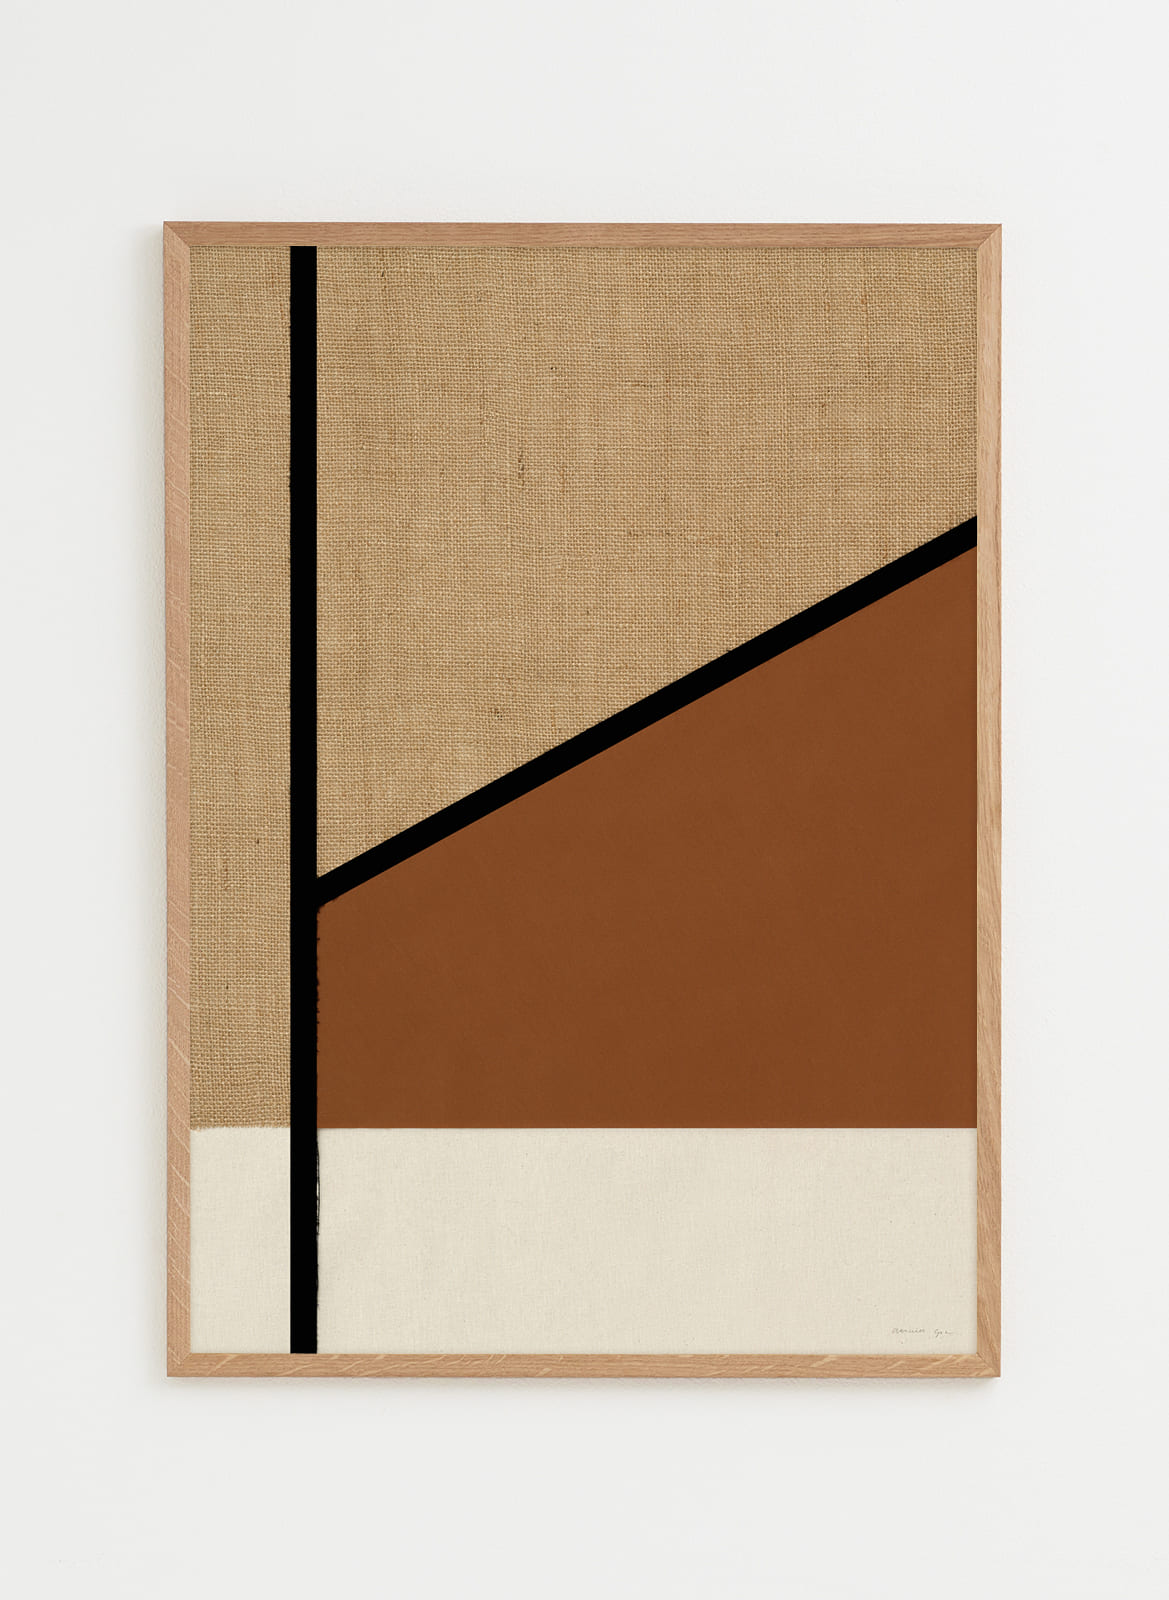 Minimalistic sandy and brown poster with black lines made in fabric by atelier cph